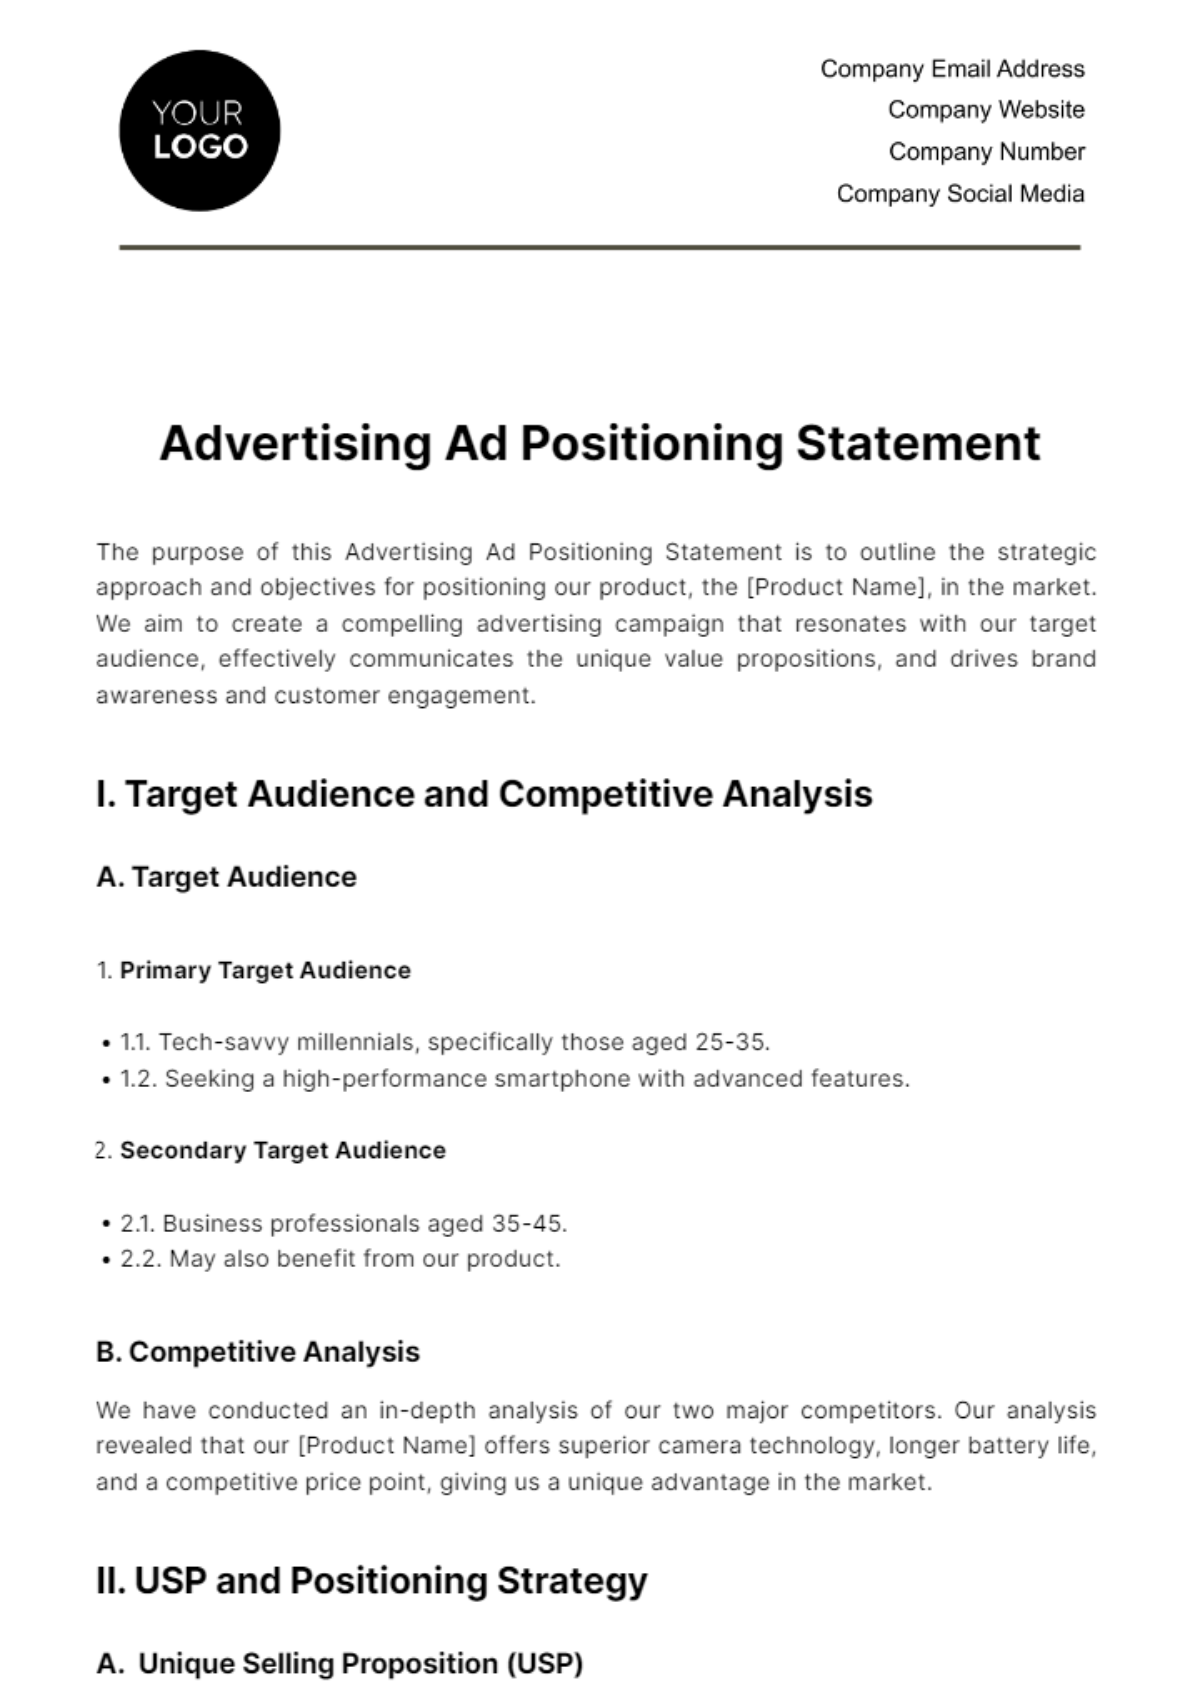 Advertising Ad Positioning Statement Template